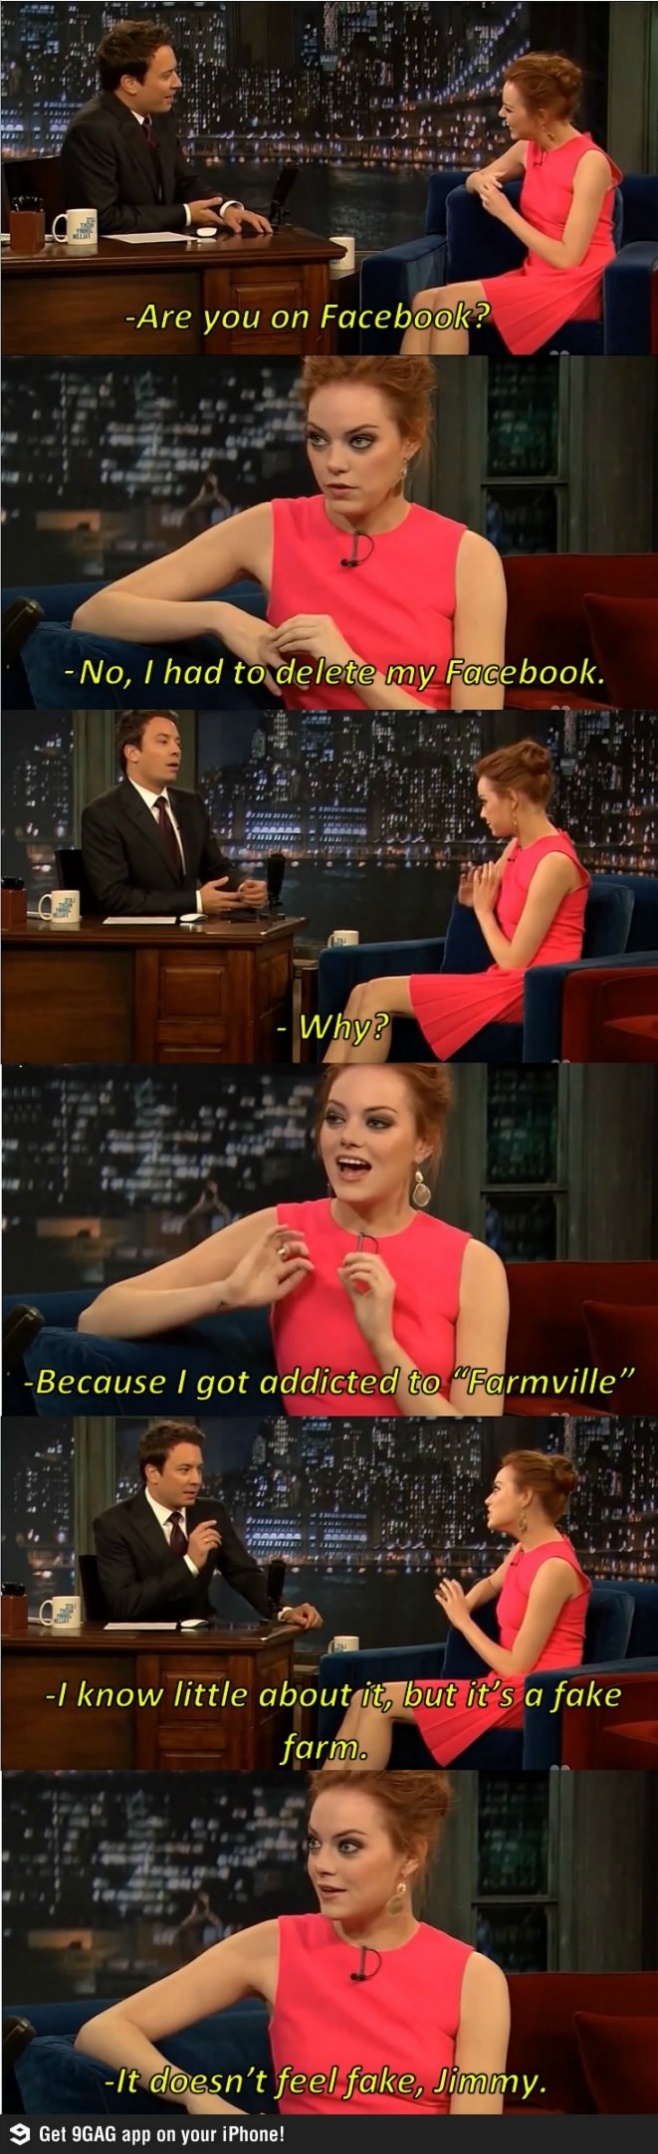 Emma Stone Abandoned Facebook After Becoming Addicted to FarmVille